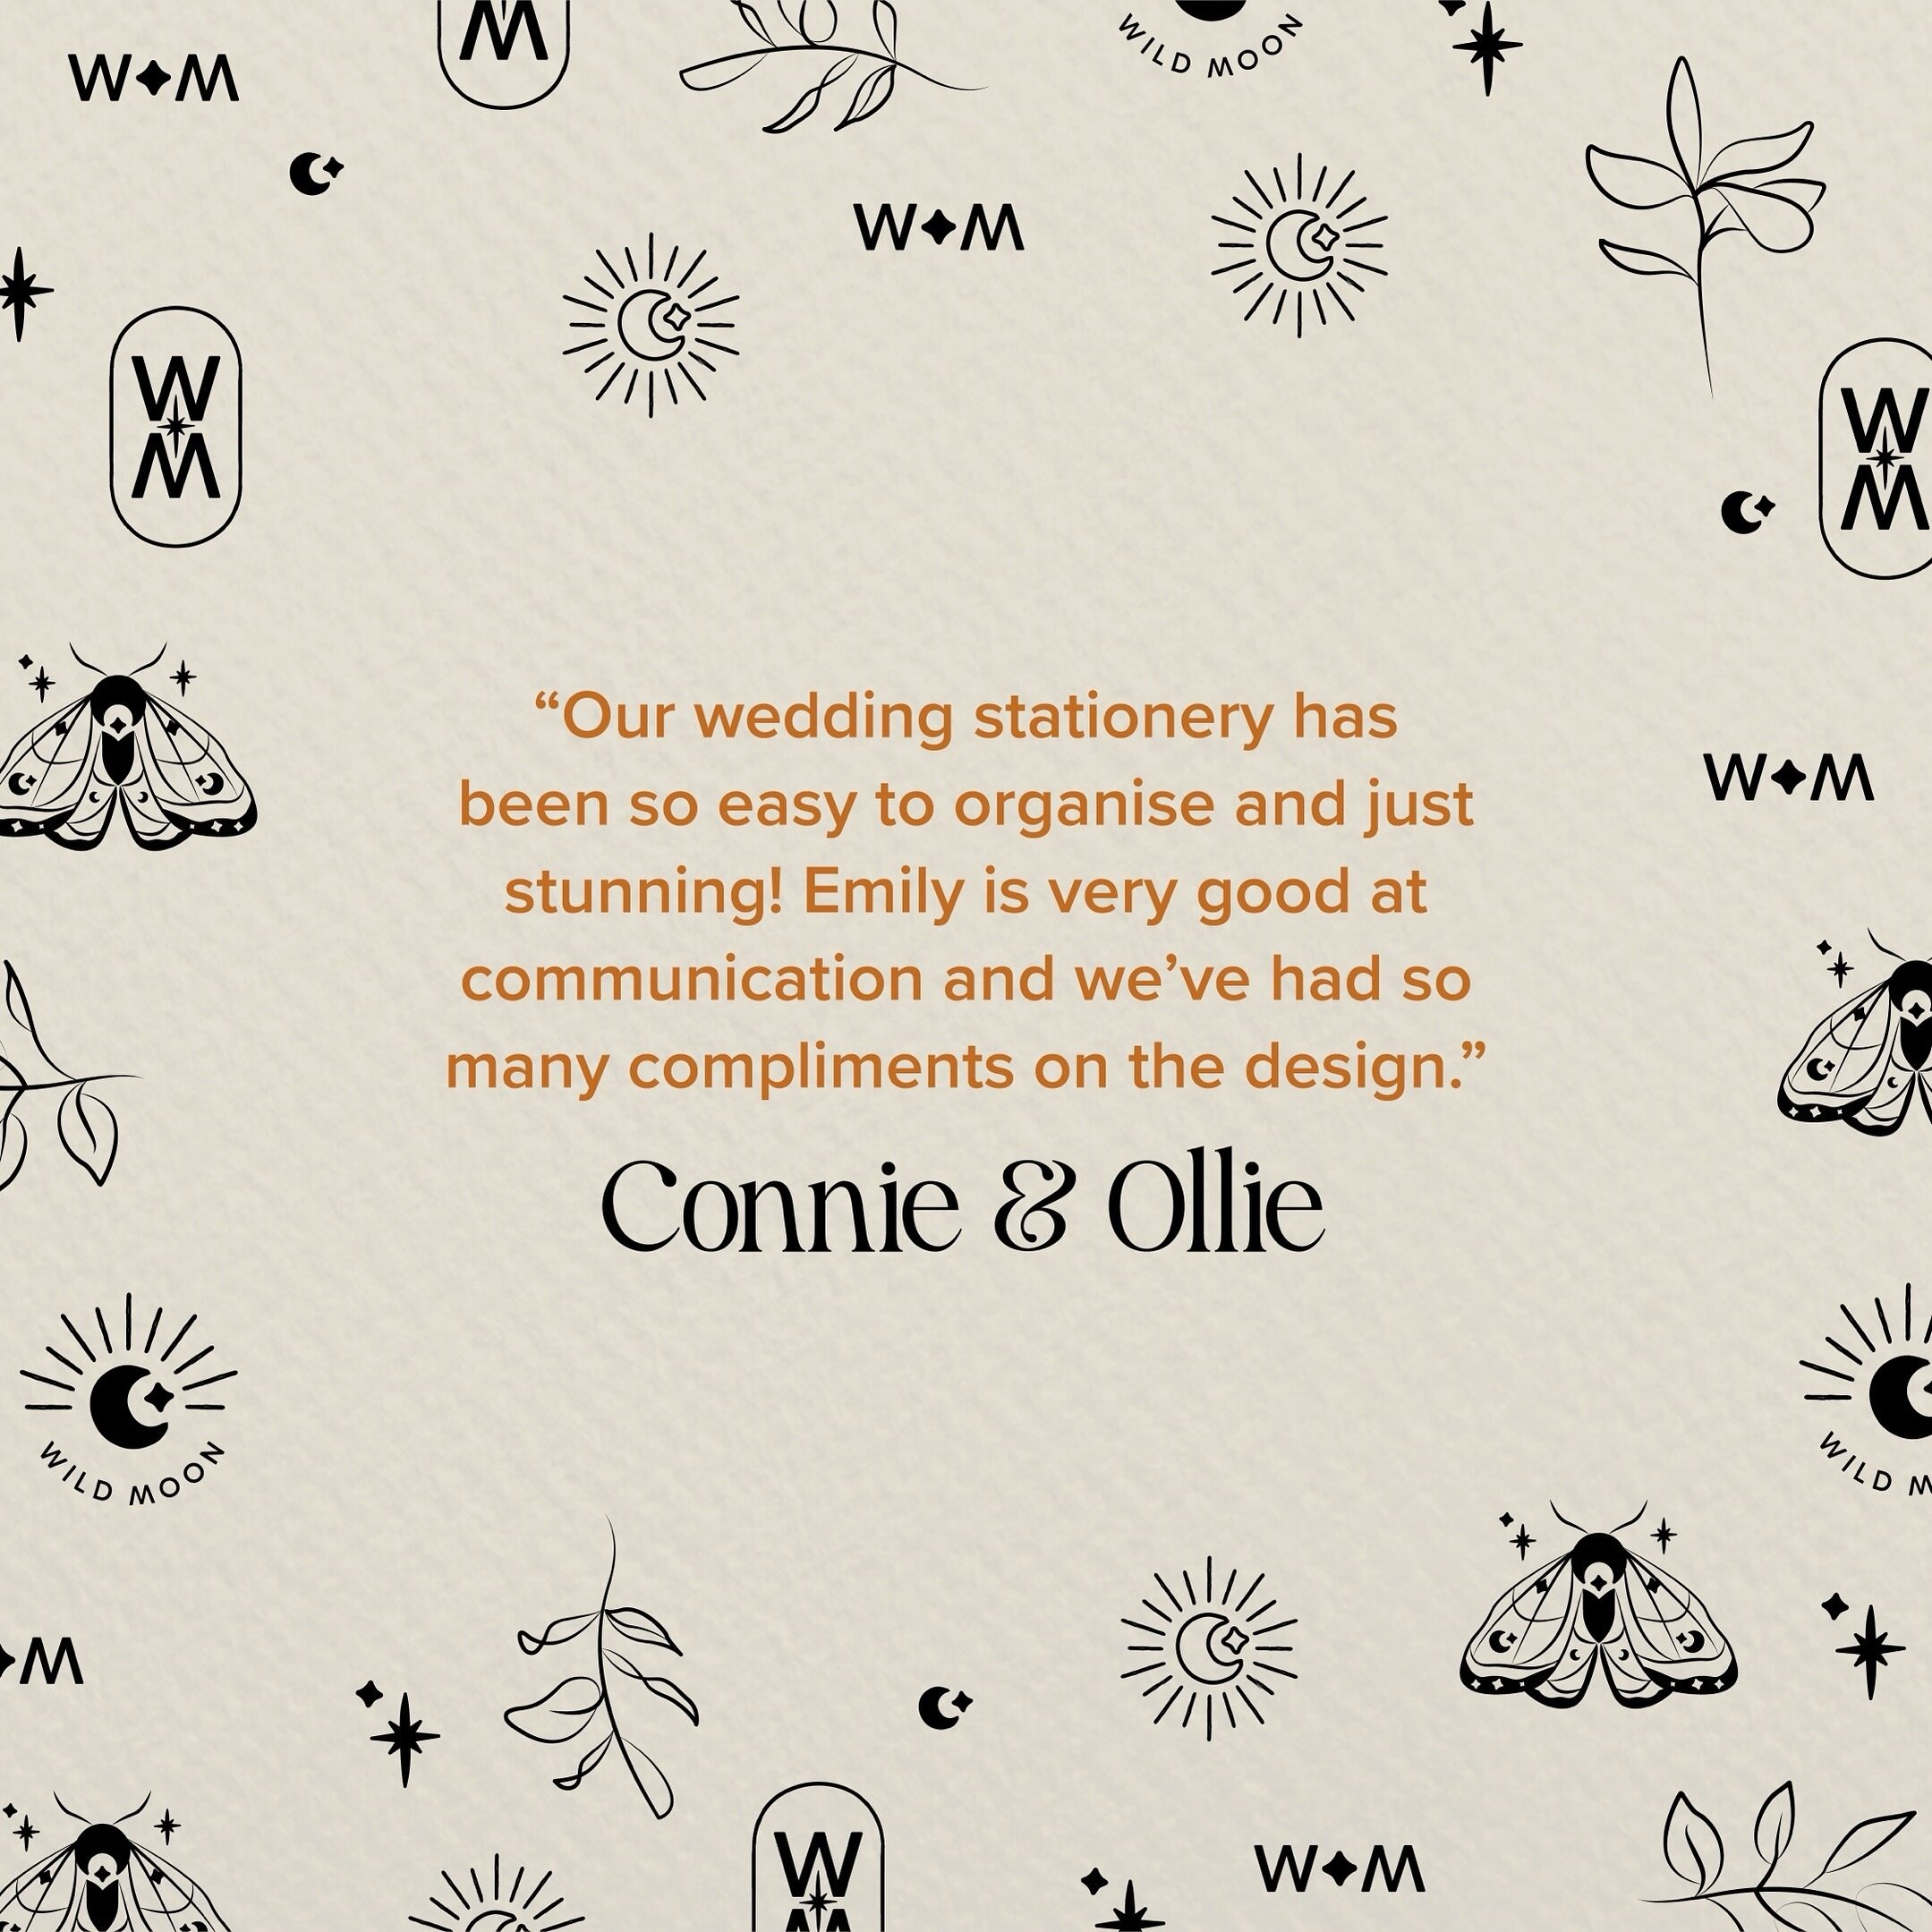 💌 Love Note 💌

&ldquo;Our wedding stationery has been so easy to organise and is just stunning! Emily is very good at communication and we&rsquo;ve had so many compliments on the design!&rdquo; - Connie &amp; Ollie

&hellip;

#weddinginvitations #w